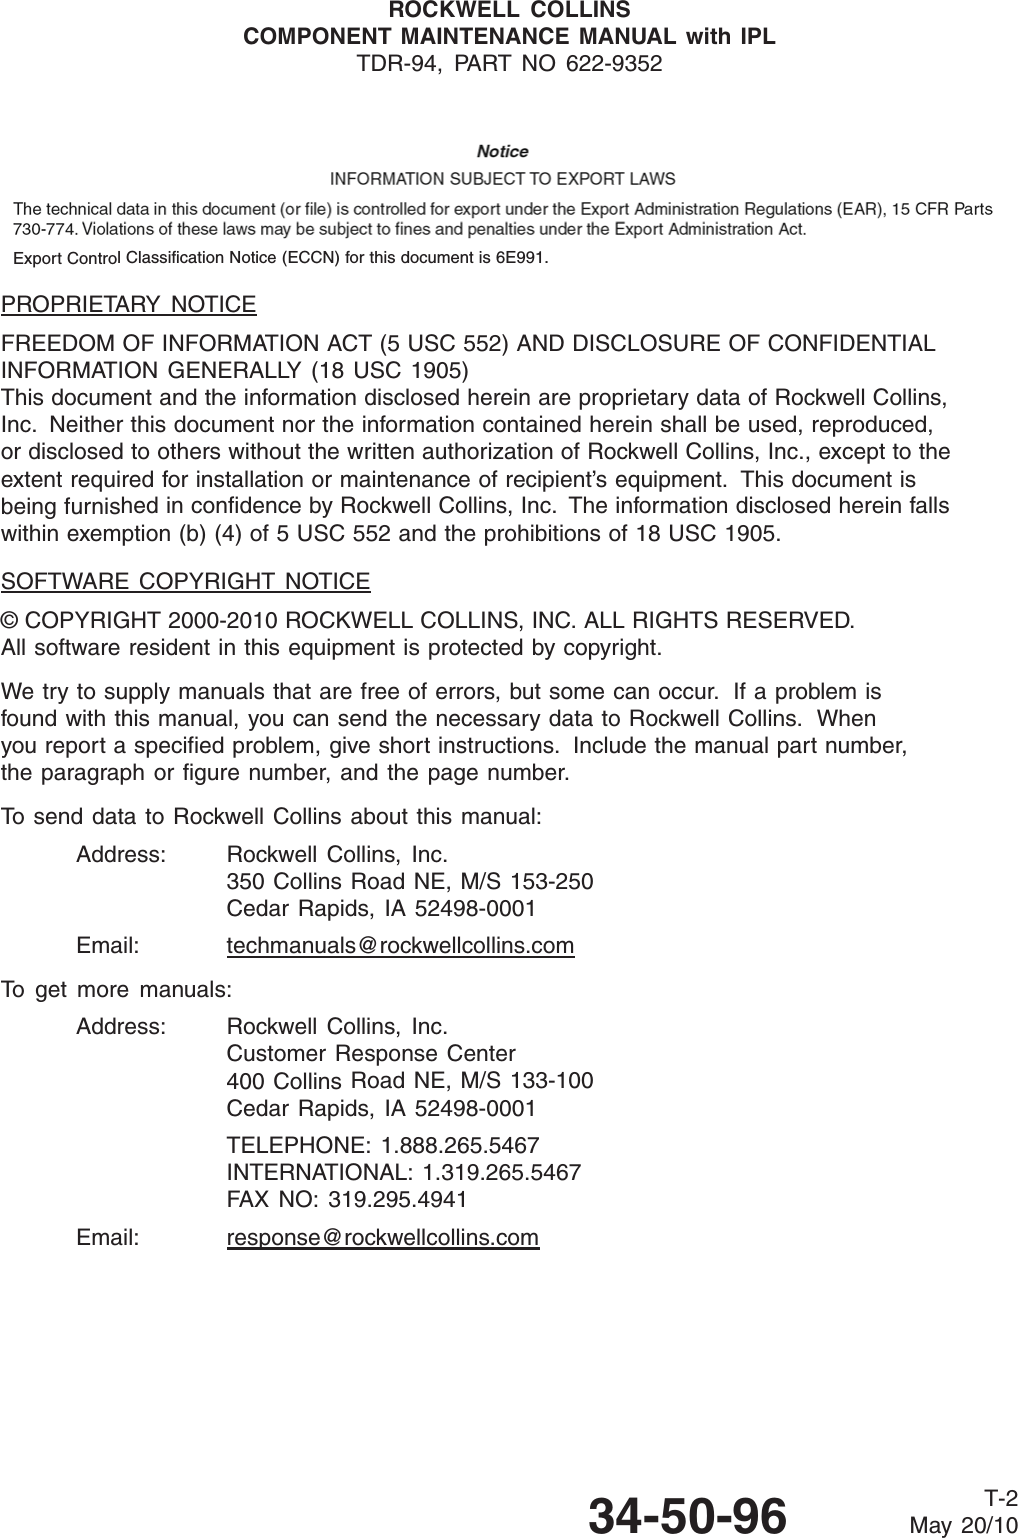 ROCKWELL COLLINSCOMPONENT MAINTENANCE MANUAL with IPLTDR-94, PART NO 622-9352Export Control Classification Notice (ECCN) for this document is 6E991.PROPRIETARY NOTICEFREEDOM OF INFORMATION ACT (5 USC 552) AND DISCLOSURE OF CONFIDENTIALINFORMATION GENERALLY (18 USC 1905)This document and the information disclosed herein are proprietary data of Rockwell Collins,Inc. Neither this document nor the information contained herein shall be used, reproduced,or disclosed to others without the written authorization of Rockwell Collins, Inc., except to theextent required for installation or maintenance of recipient’s equipment. This document isbeing furnished in confidence by Rockwell Collins, Inc. The information disclosed herein fallswithin exemption (b) (4) of 5 USC 552 and the prohibitions of 18 USC 1905.SOFTWARE COPYRIGHT NOTICE© COPYRIGHT 2000-2010 ROCKWELL COLLINS, INC. ALL RIGHTS RESERVED.All software resident in this equipment is protected by copyright.We try to supply manuals that are free of errors, but some can occur. If a problem isfound with this manual, you can send the necessary data to Rockwell Collins. Whenyou report a specified problem, give short instructions. Include the manual part number,the paragraph or figure number, and the page number.To send data to Rockwell Collins about this manual:Address: Rockwell Collins, Inc.350 Collins Road NE, M/S 153-250Cedar Rapids, IA 52498-0001Email: techmanuals@rockwellcollins.comTo get more manuals:Address: Rockwell Collins, Inc.Customer Response Center400 Collins Road NE, M/S 133-100Cedar Rapids, IA 52498-0001TELEPHONE: 1.888.265.5467INTERNATIONAL: 1.319.265.5467FAX NO: 319.295.4941Email: response@rockwellcollins.com34-50-96 T-2May 20/10